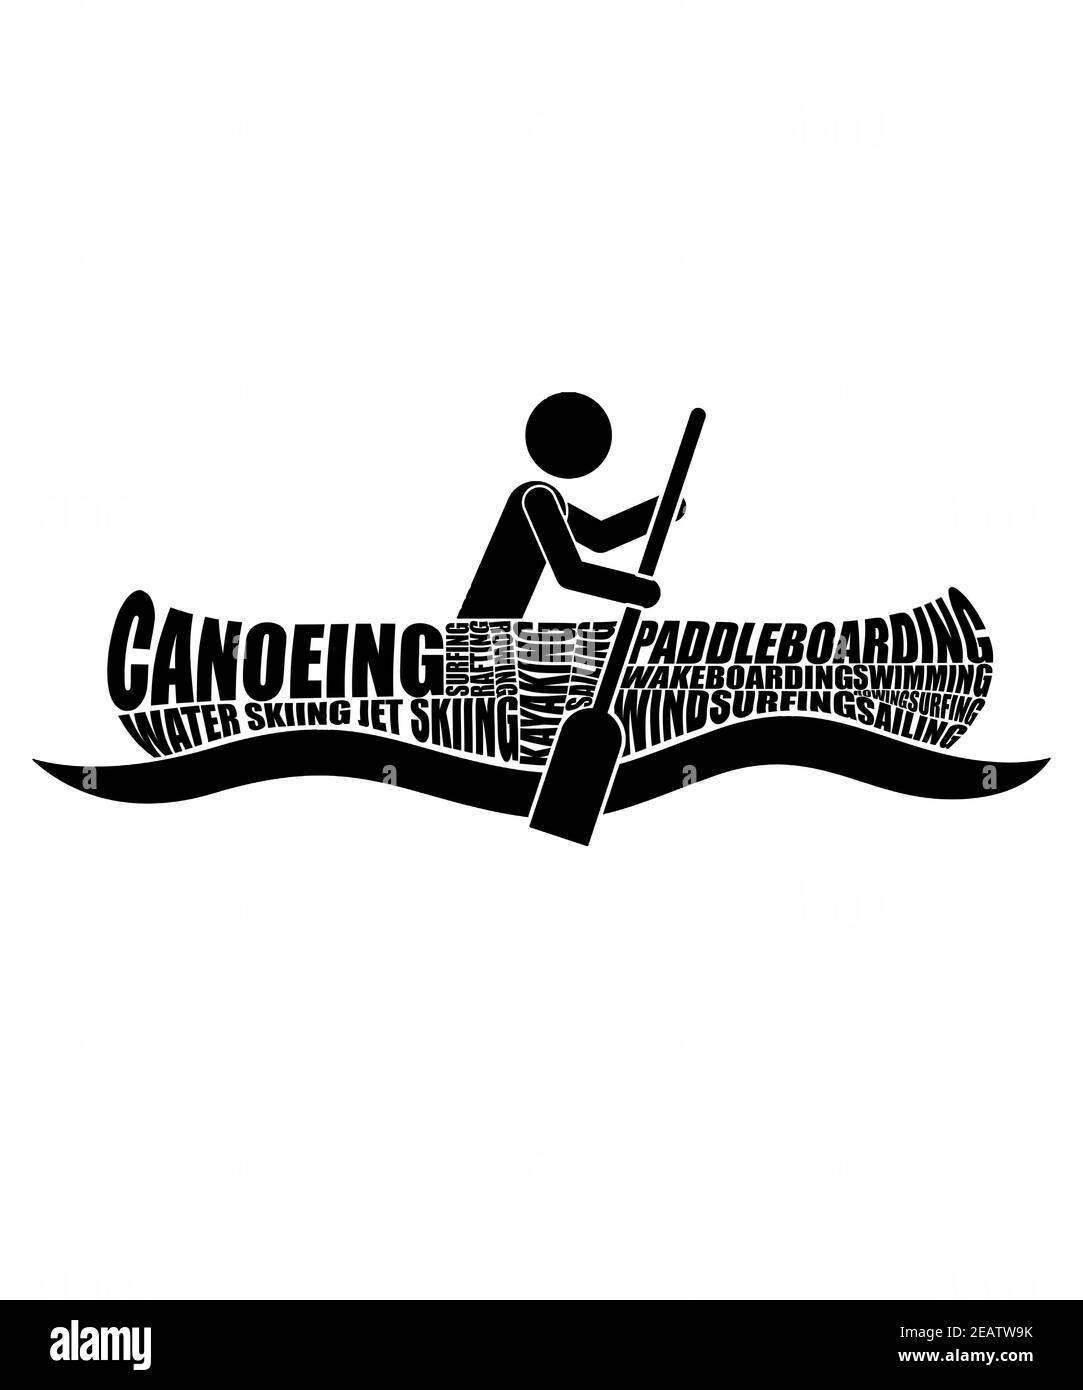 Boat watersport word cloud graphic illustration with a stick person in a kayak shape with words, canoeing, paddleboarding, water skiing, jet skiing, w Stock Photo